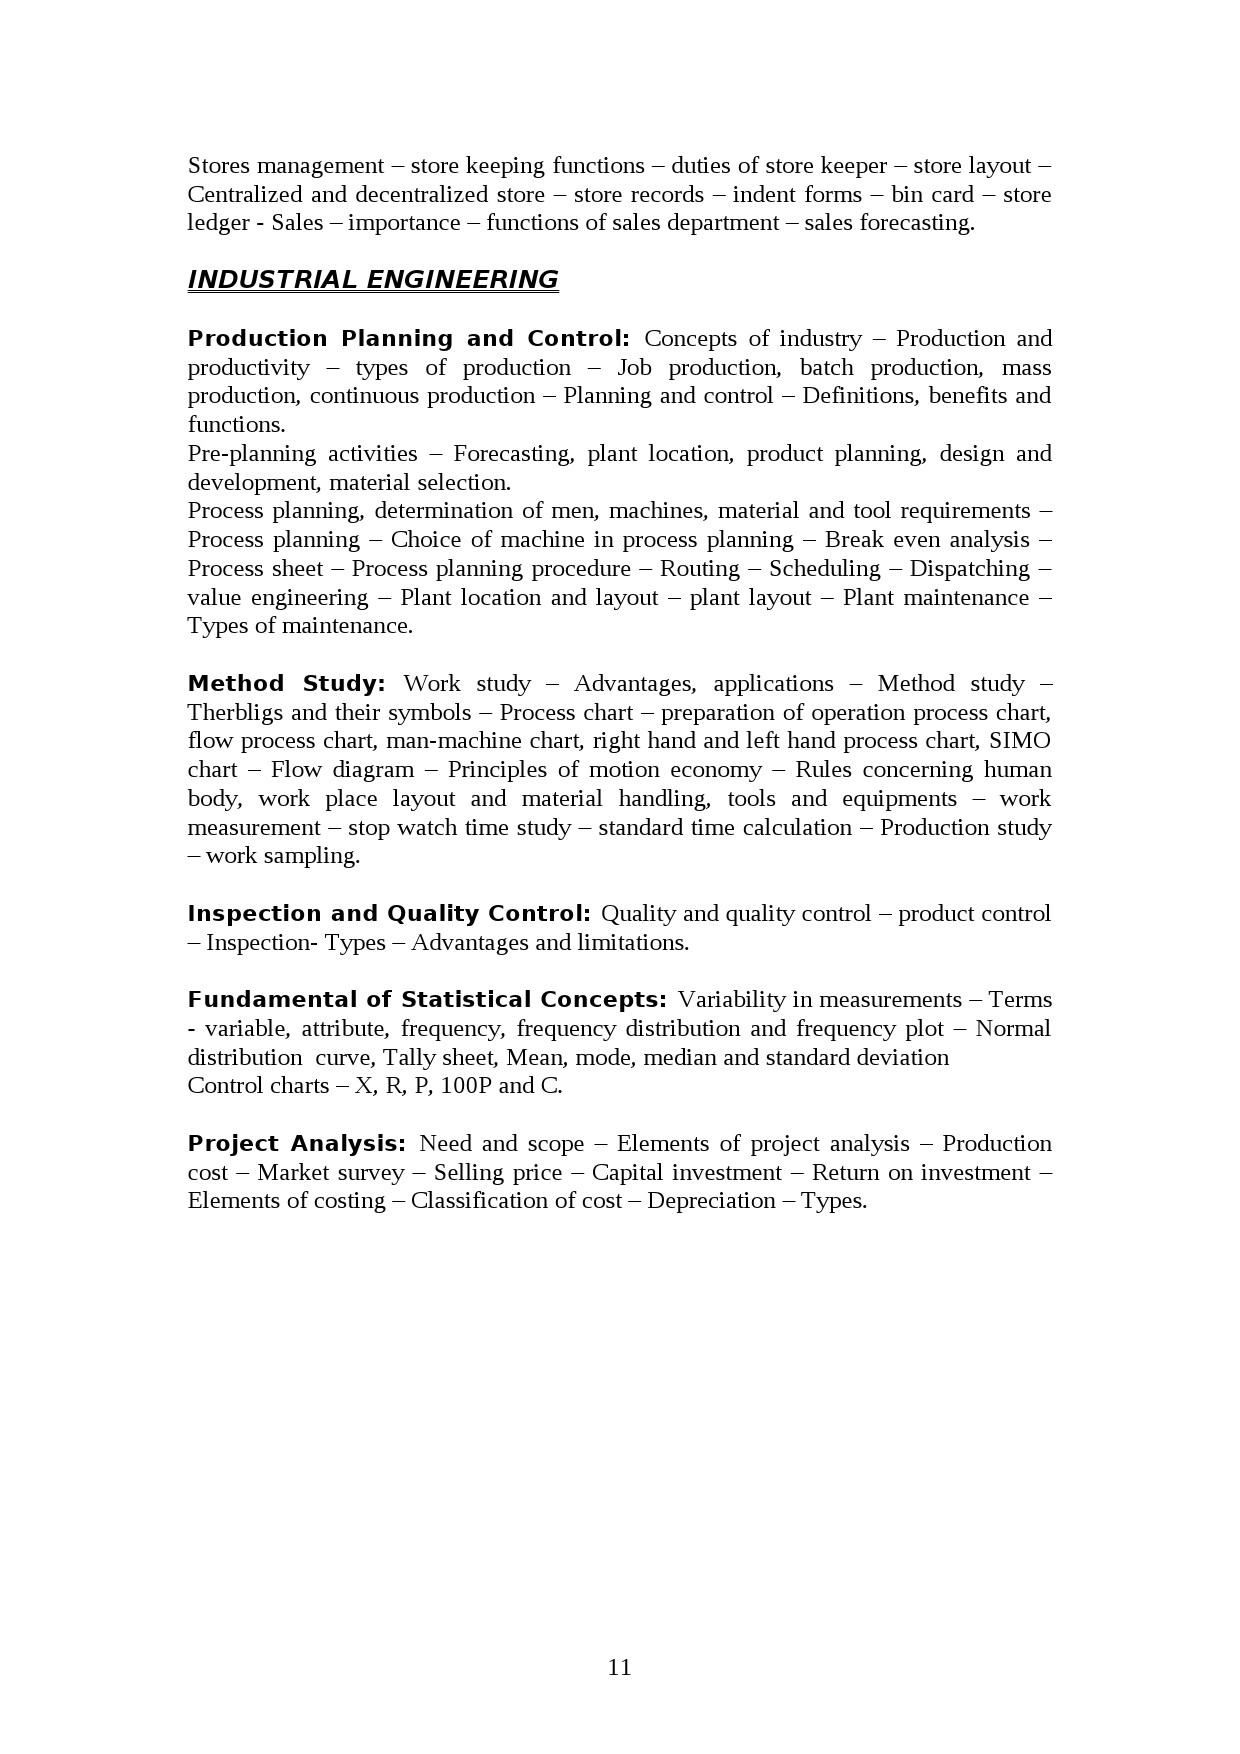 Tool And Die Engineering Lecturer in Polytechnic Exam Syllabus - Notification Image 11